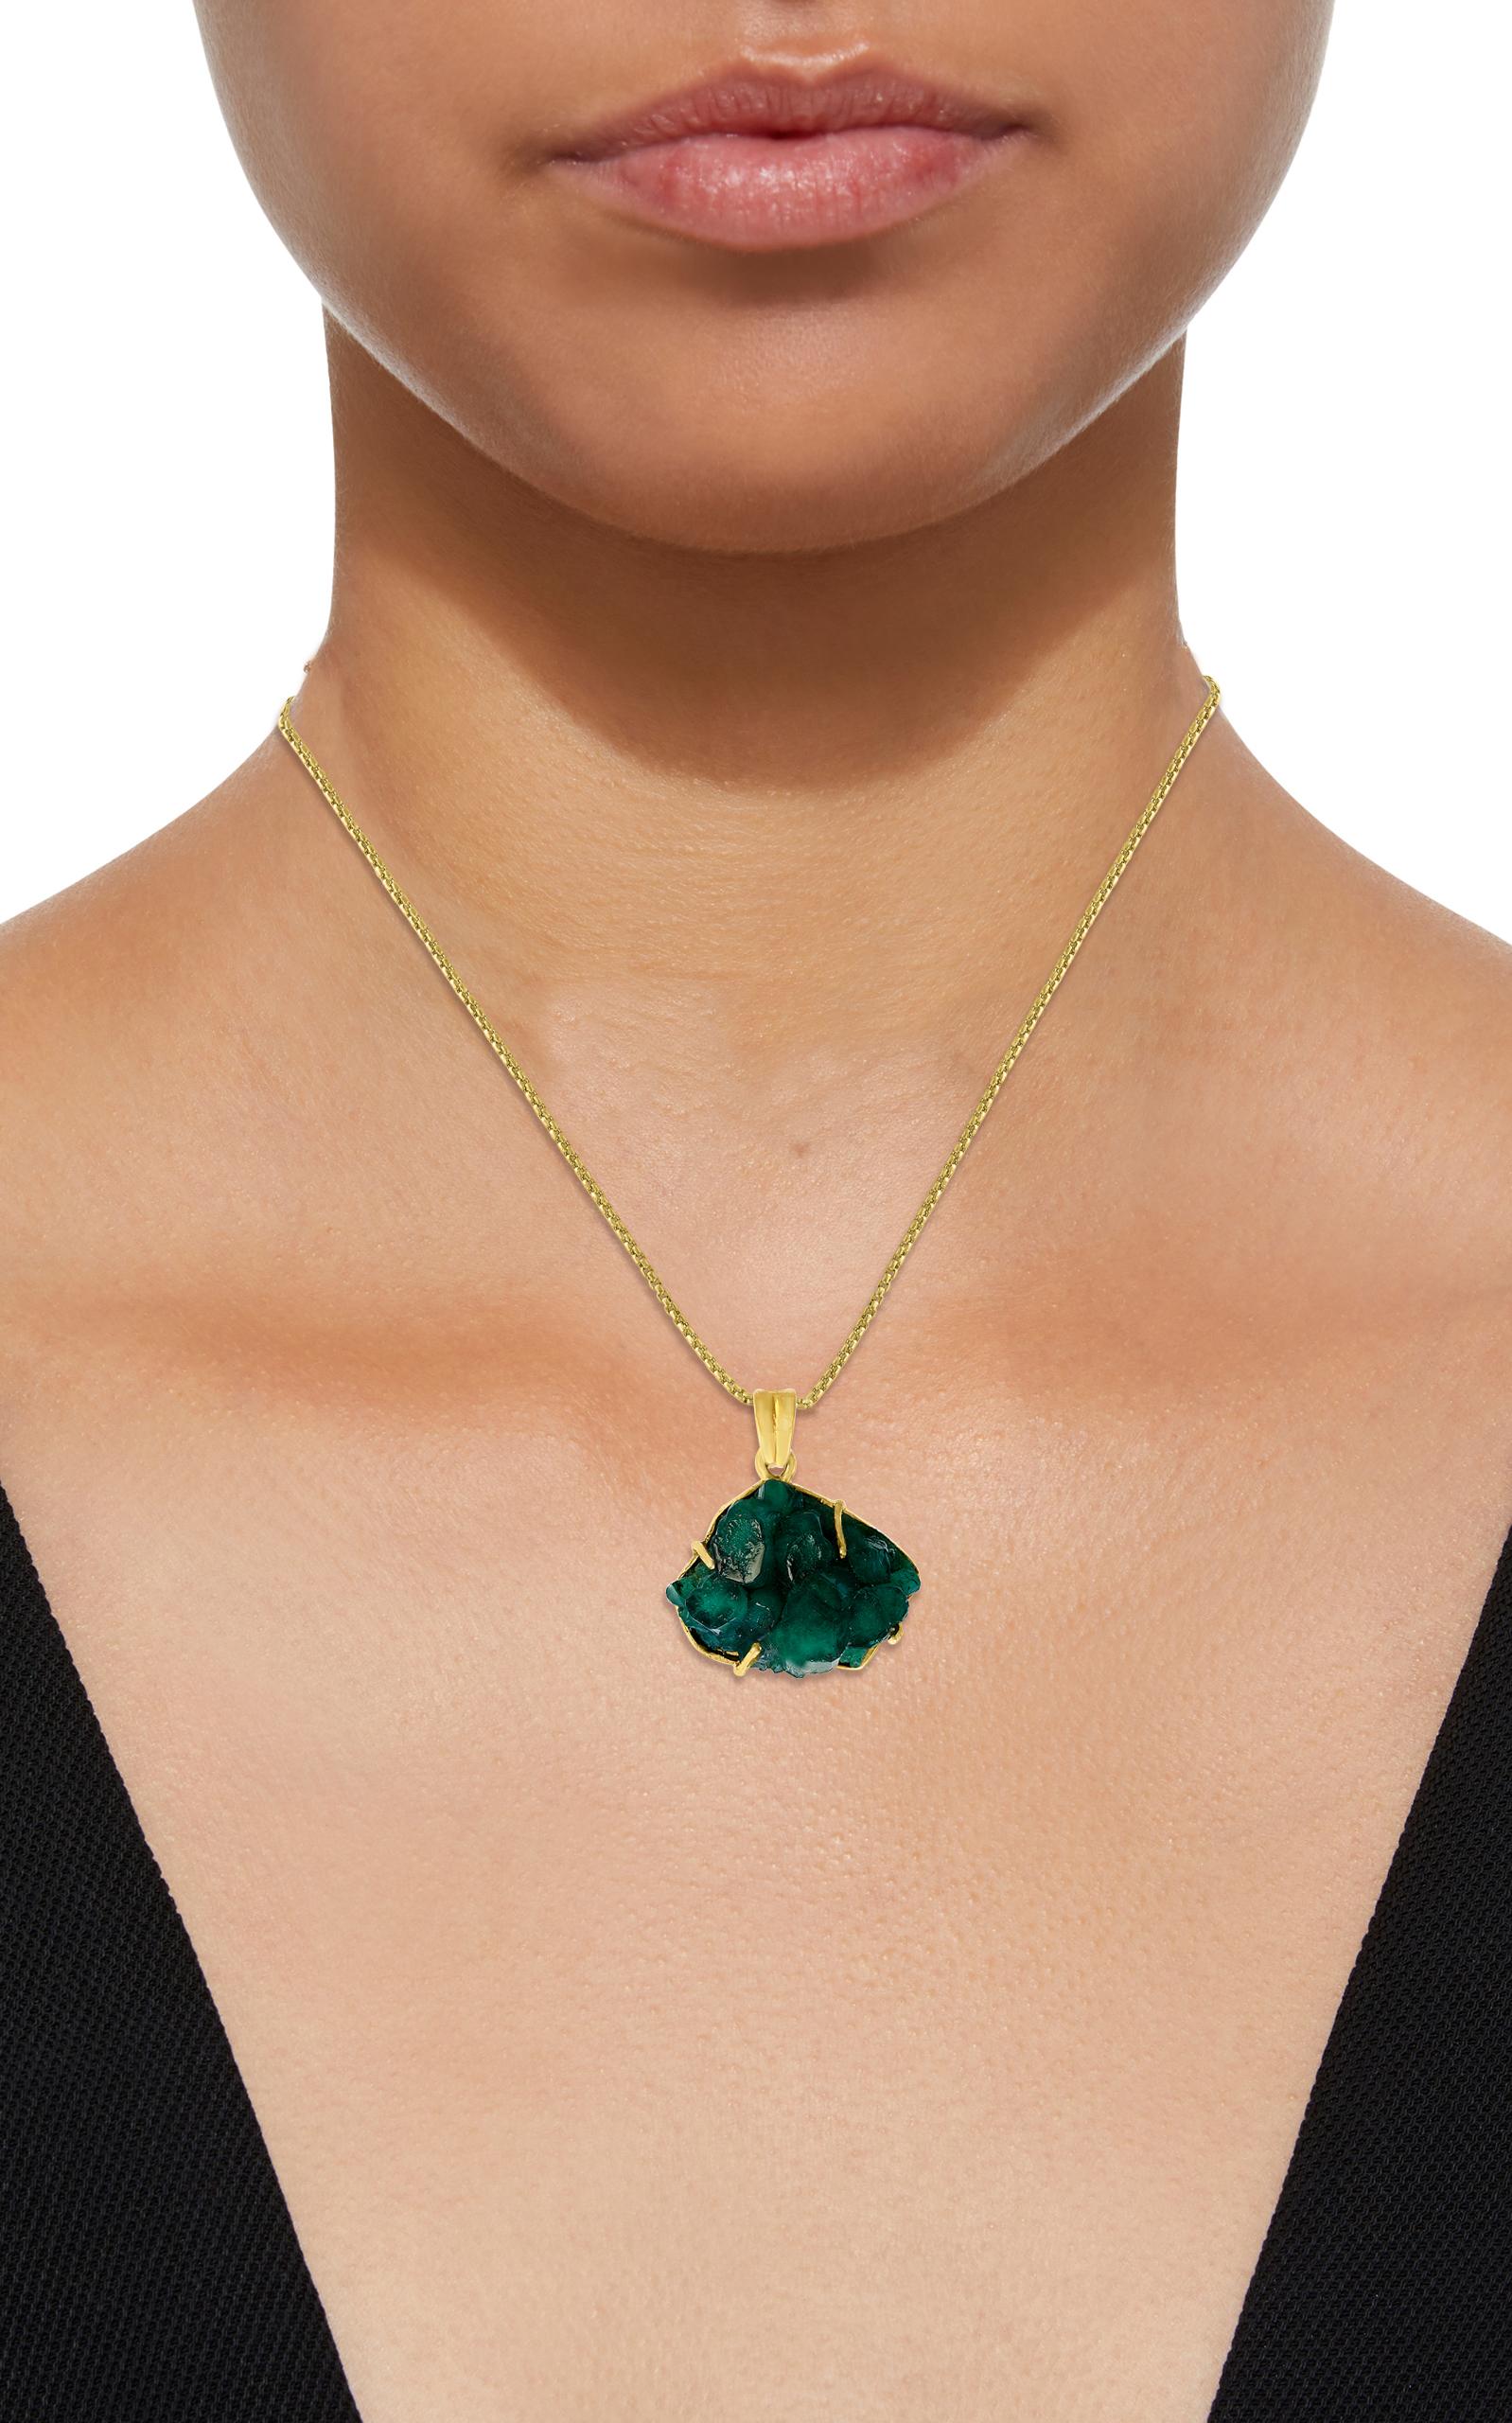 19 Carat Colombian Emerald Rough Pendent/Necklace 18 Karat Gold with Chain 3